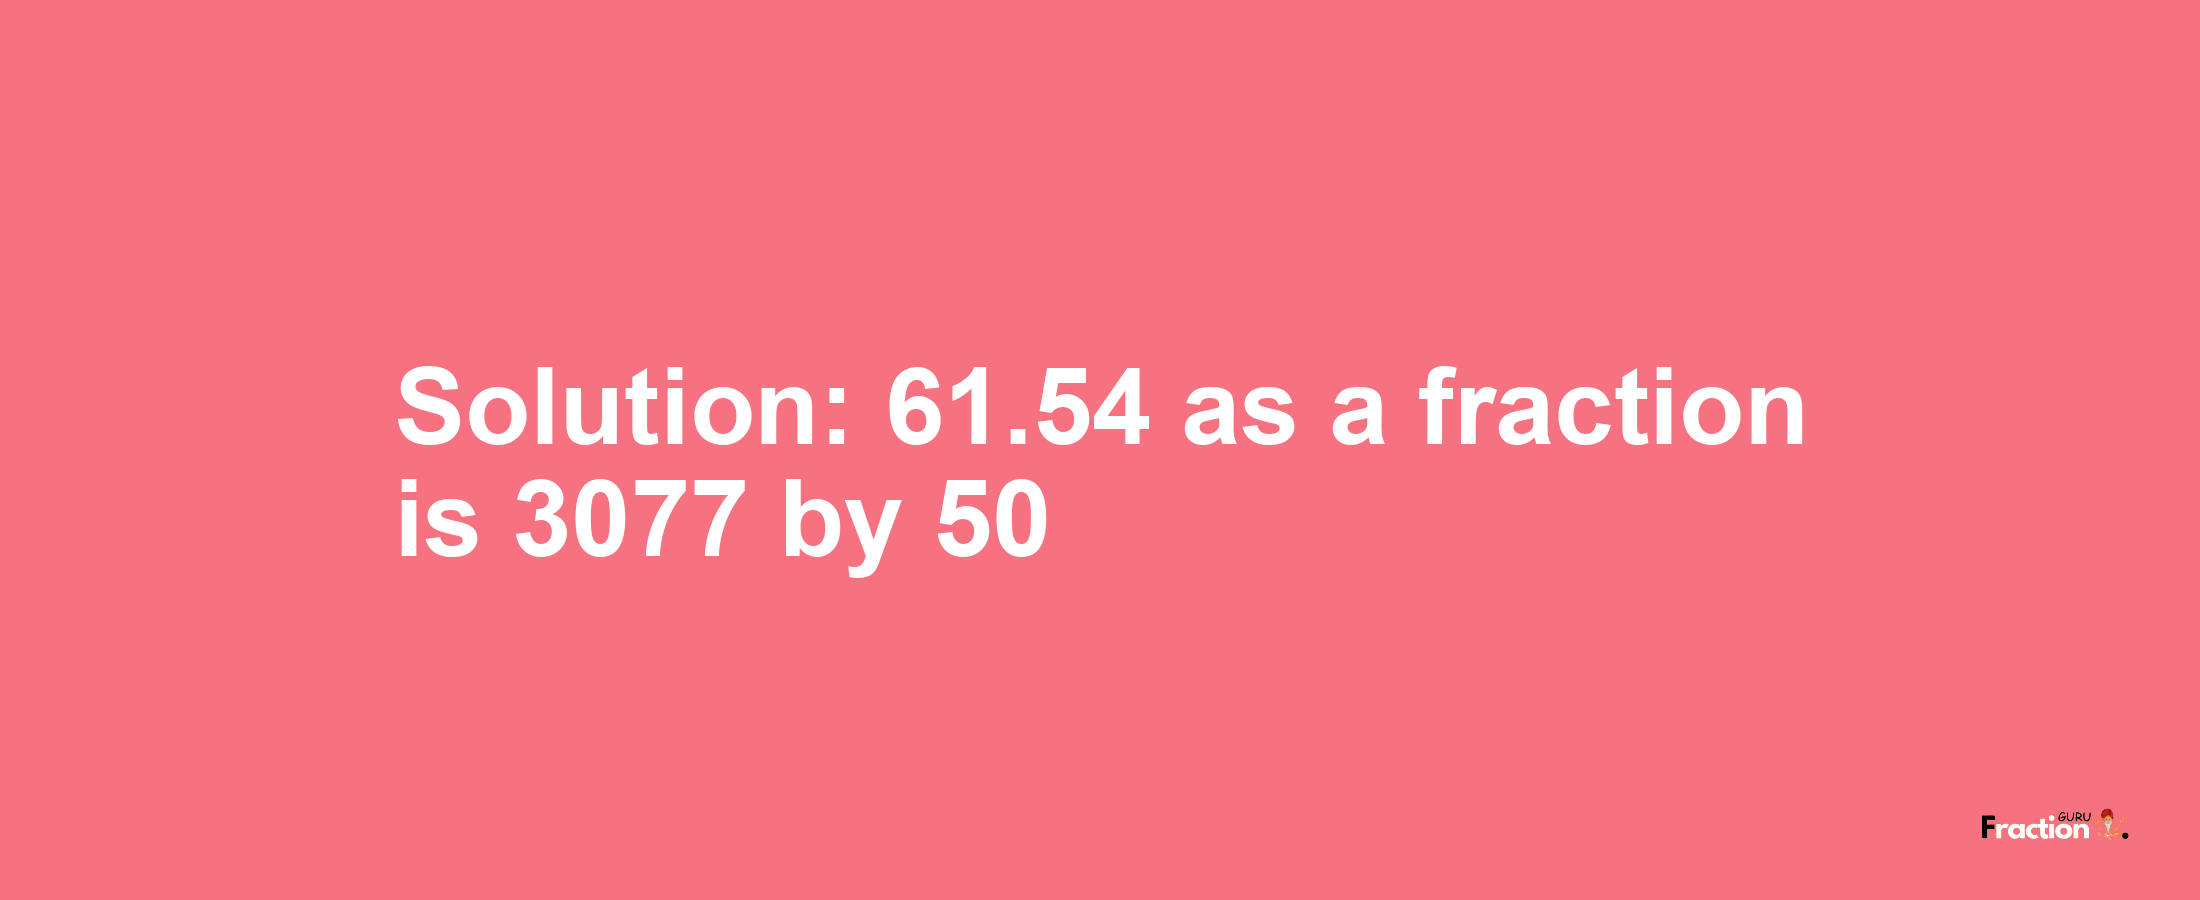 Solution:61.54 as a fraction is 3077/50